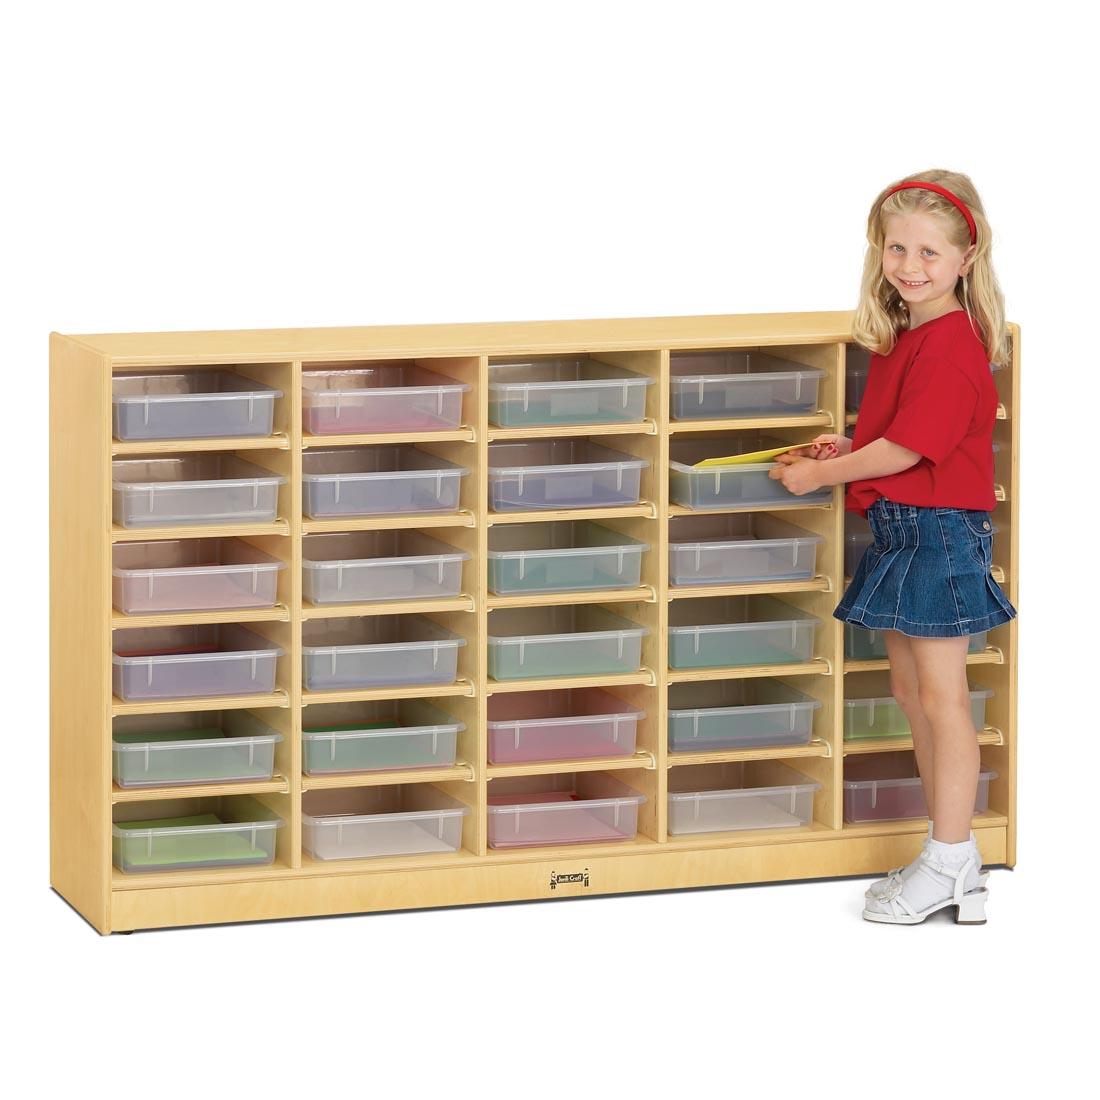 Child standing in front of the 30 Paper-Tray Mobile Storage With Clear Trays